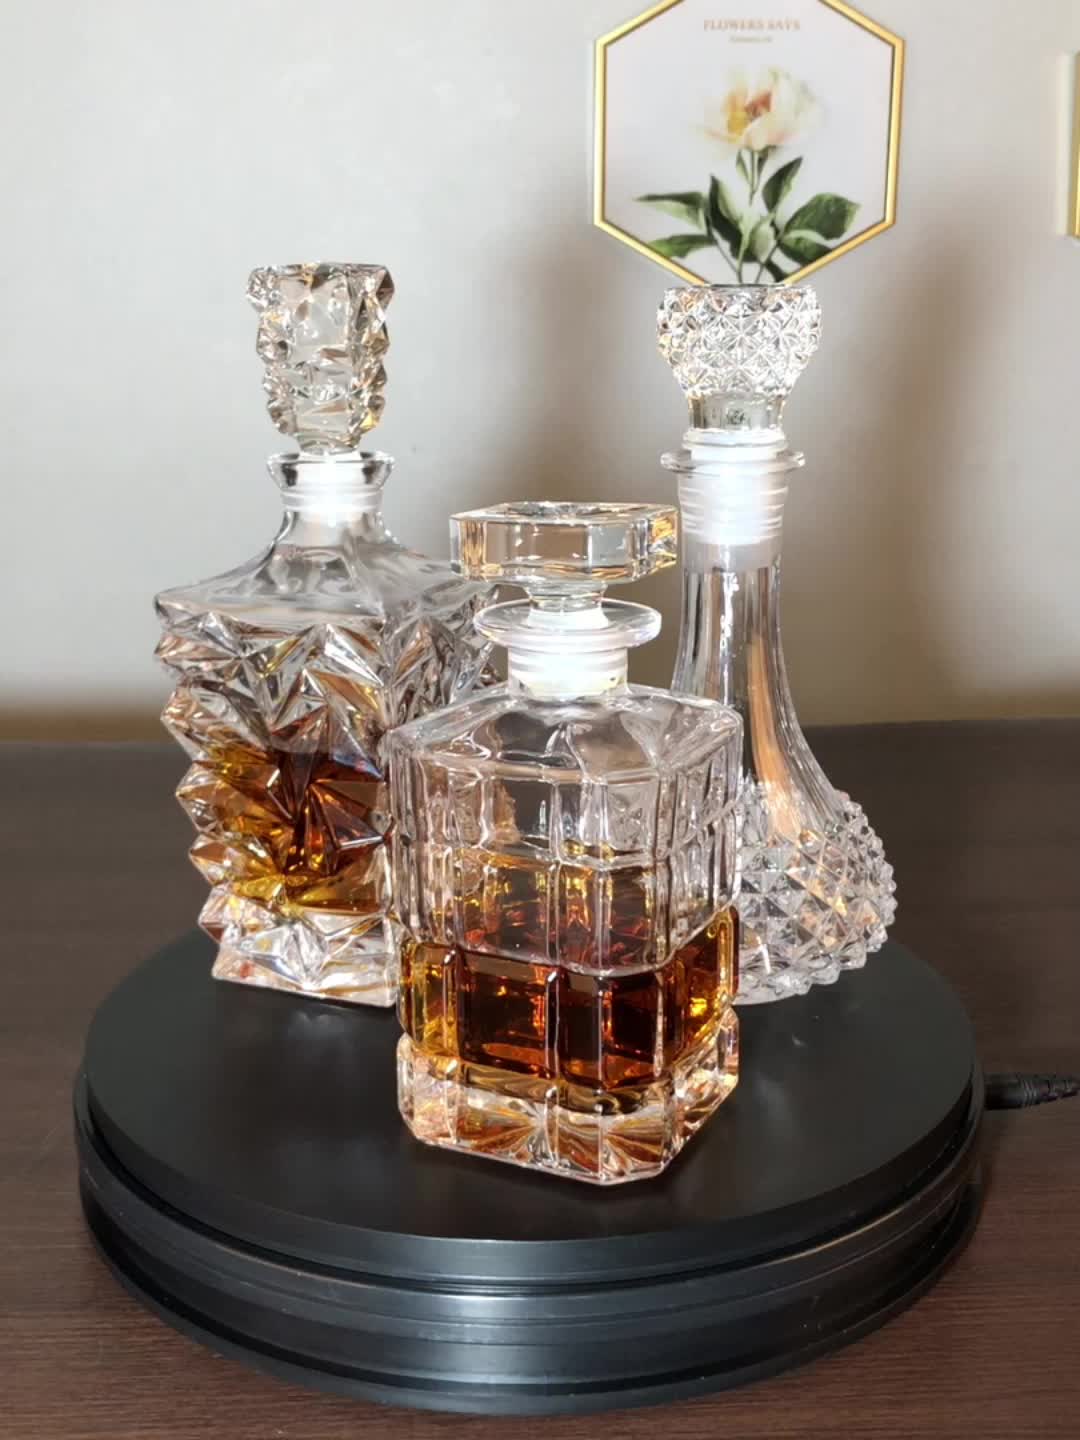 SKY liquor decanter in crystalline with cork and steel stopper